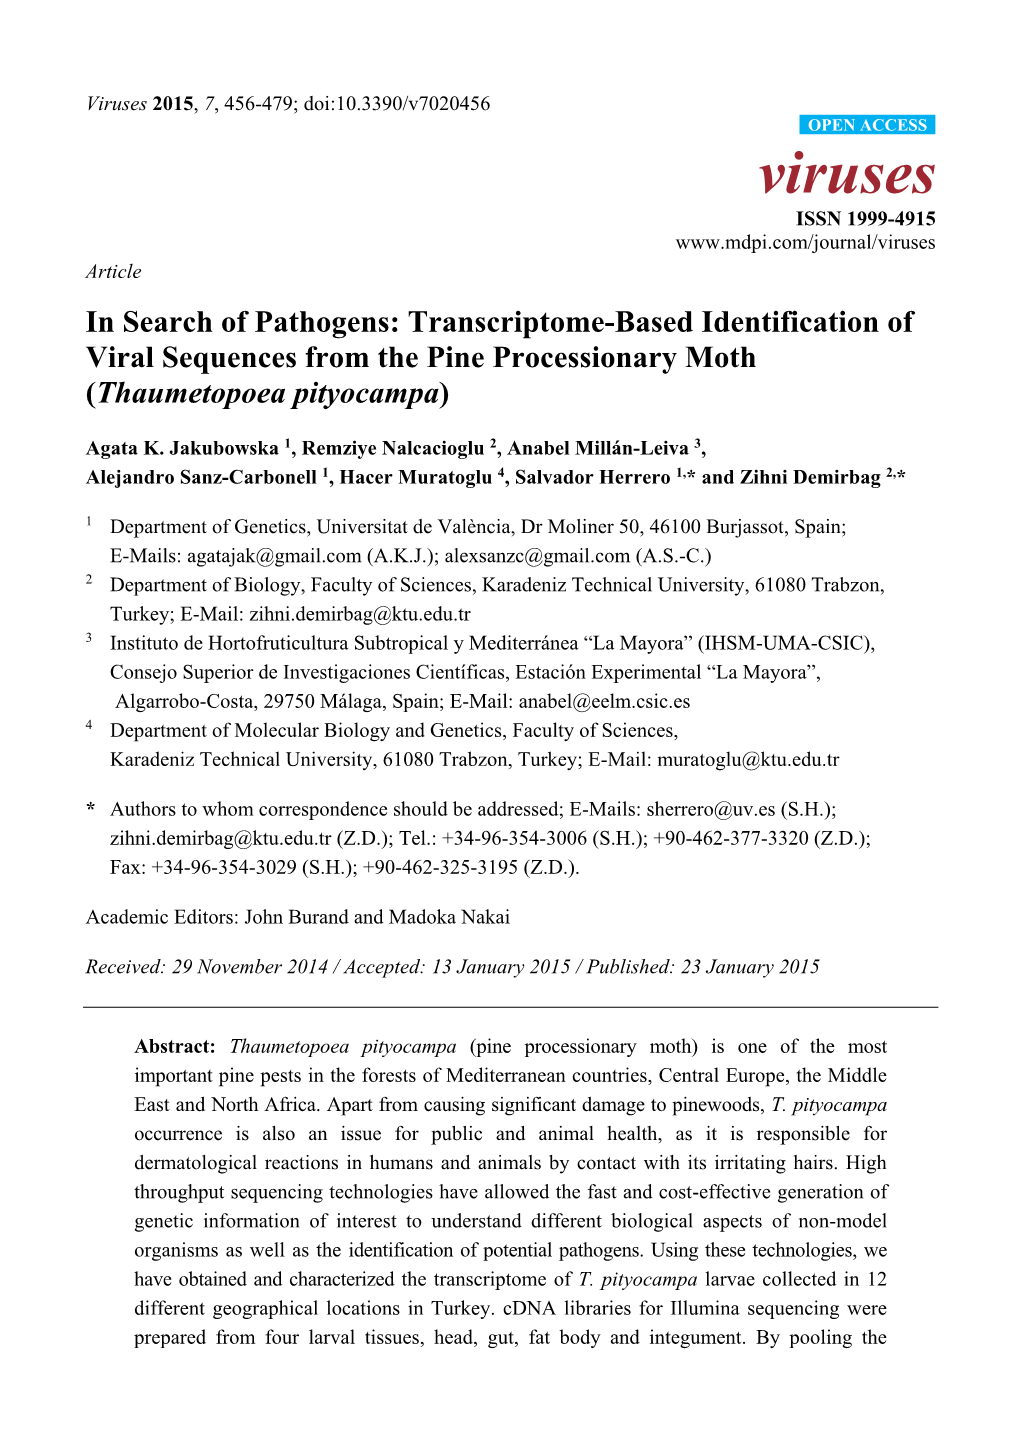 In Search of Pathogens: Transcriptome-Based Identification of Viral Sequences from the Pine Processionary Moth (Thaumetopoea Pityocampa)